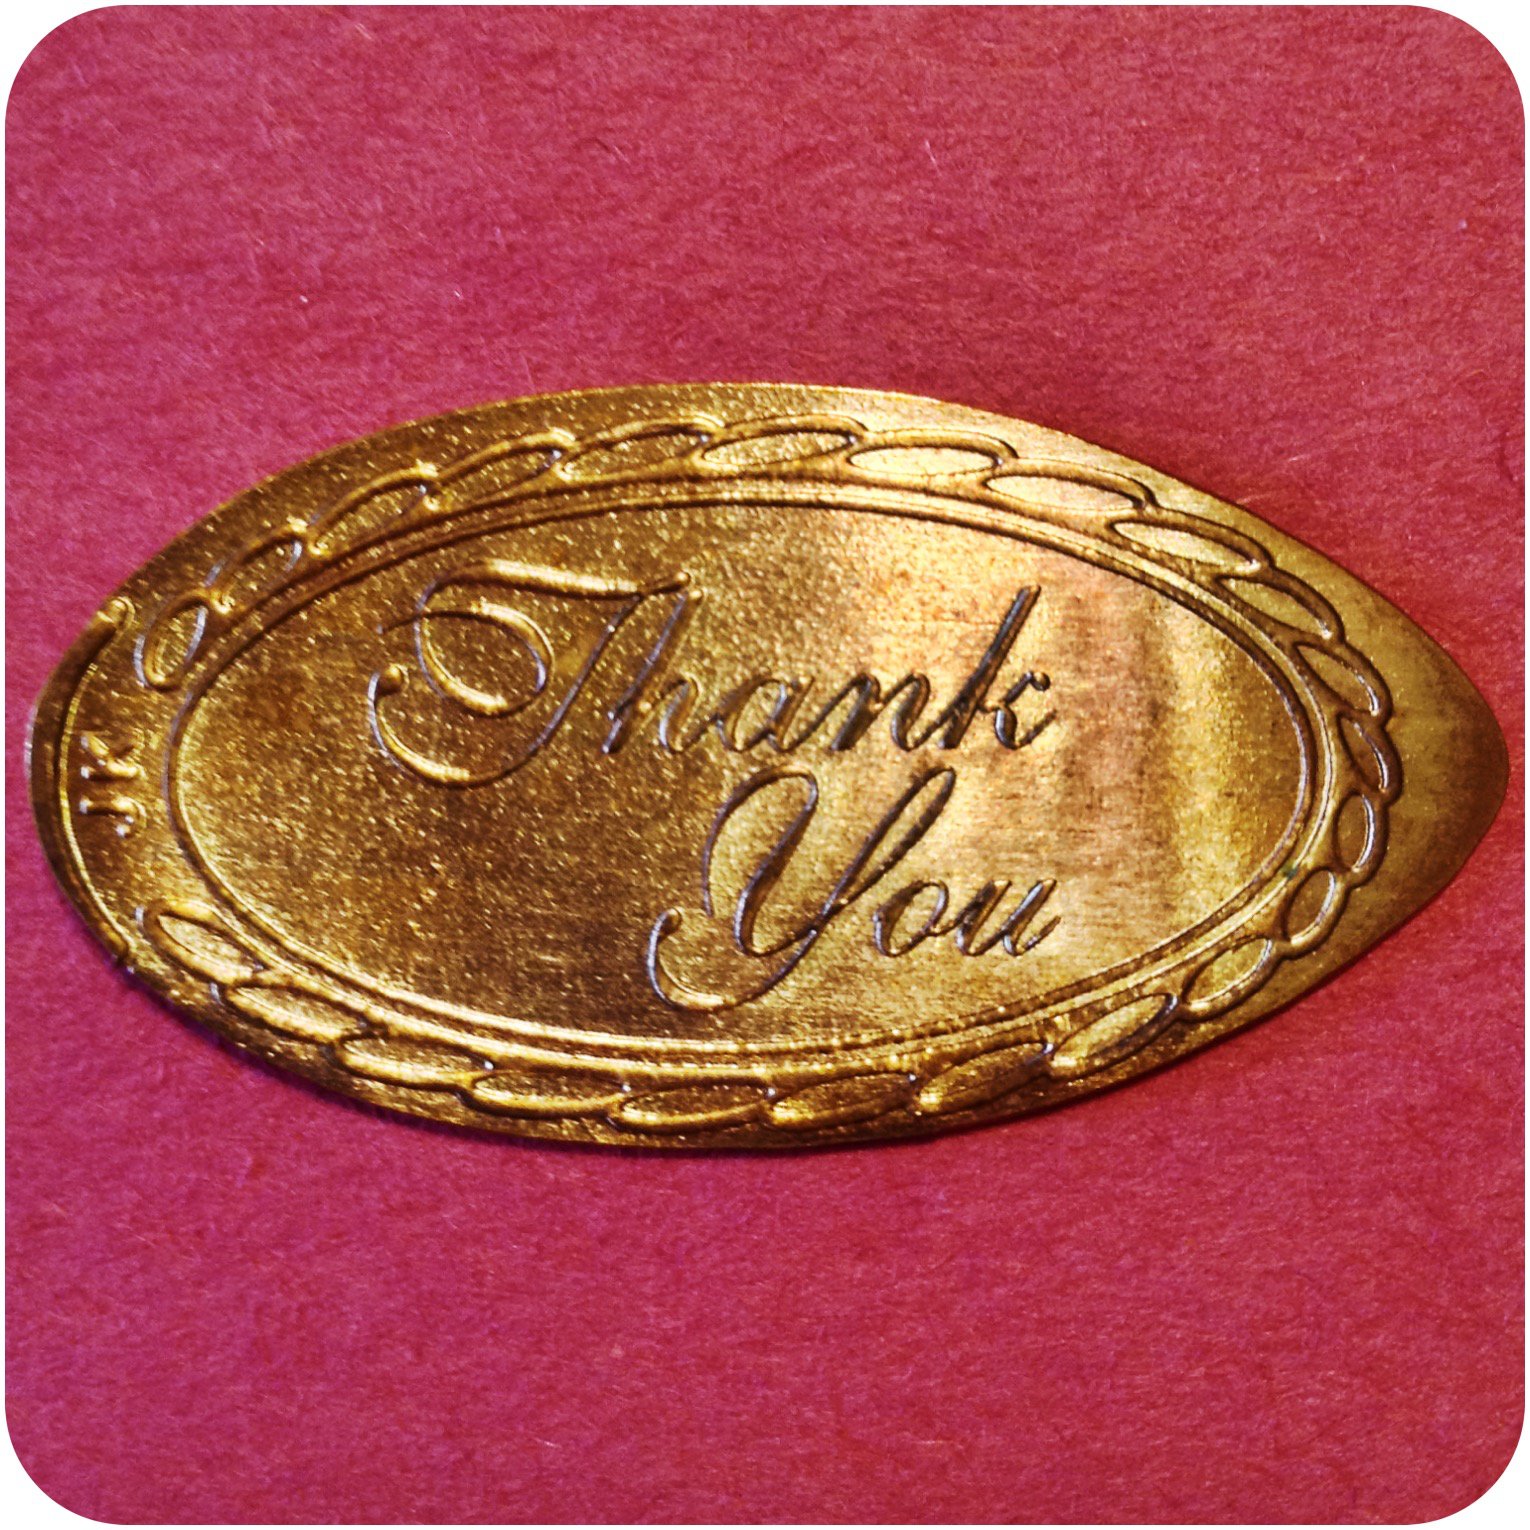 "Thank You!" with Rope Border Salutation Copper Penny engraved by James Kilcoyne